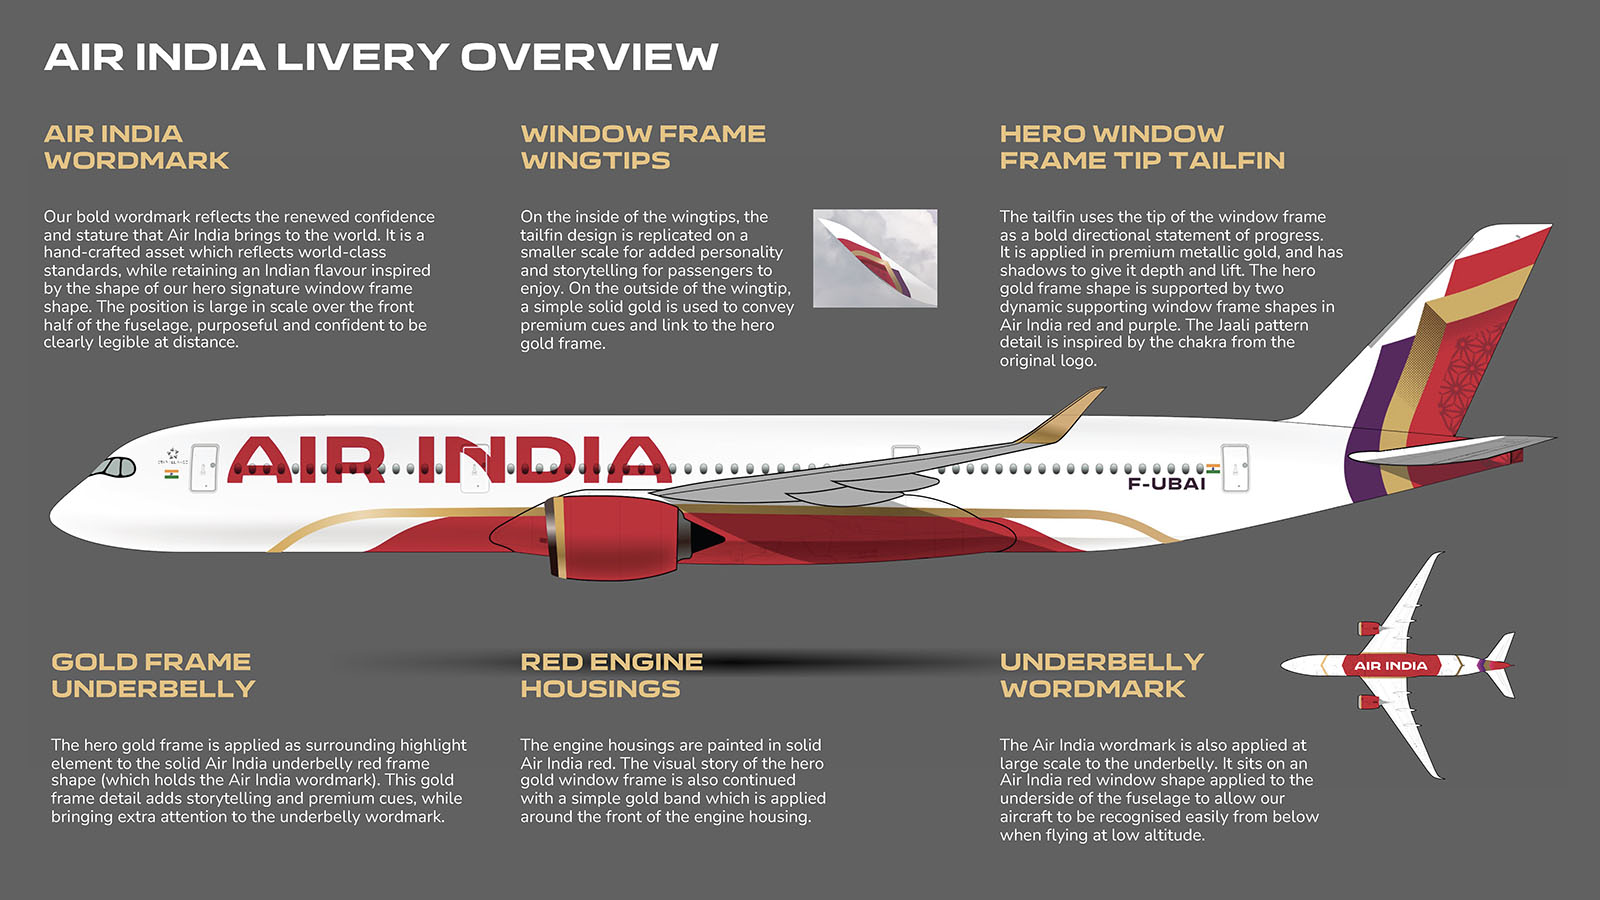 Details of Air India livery